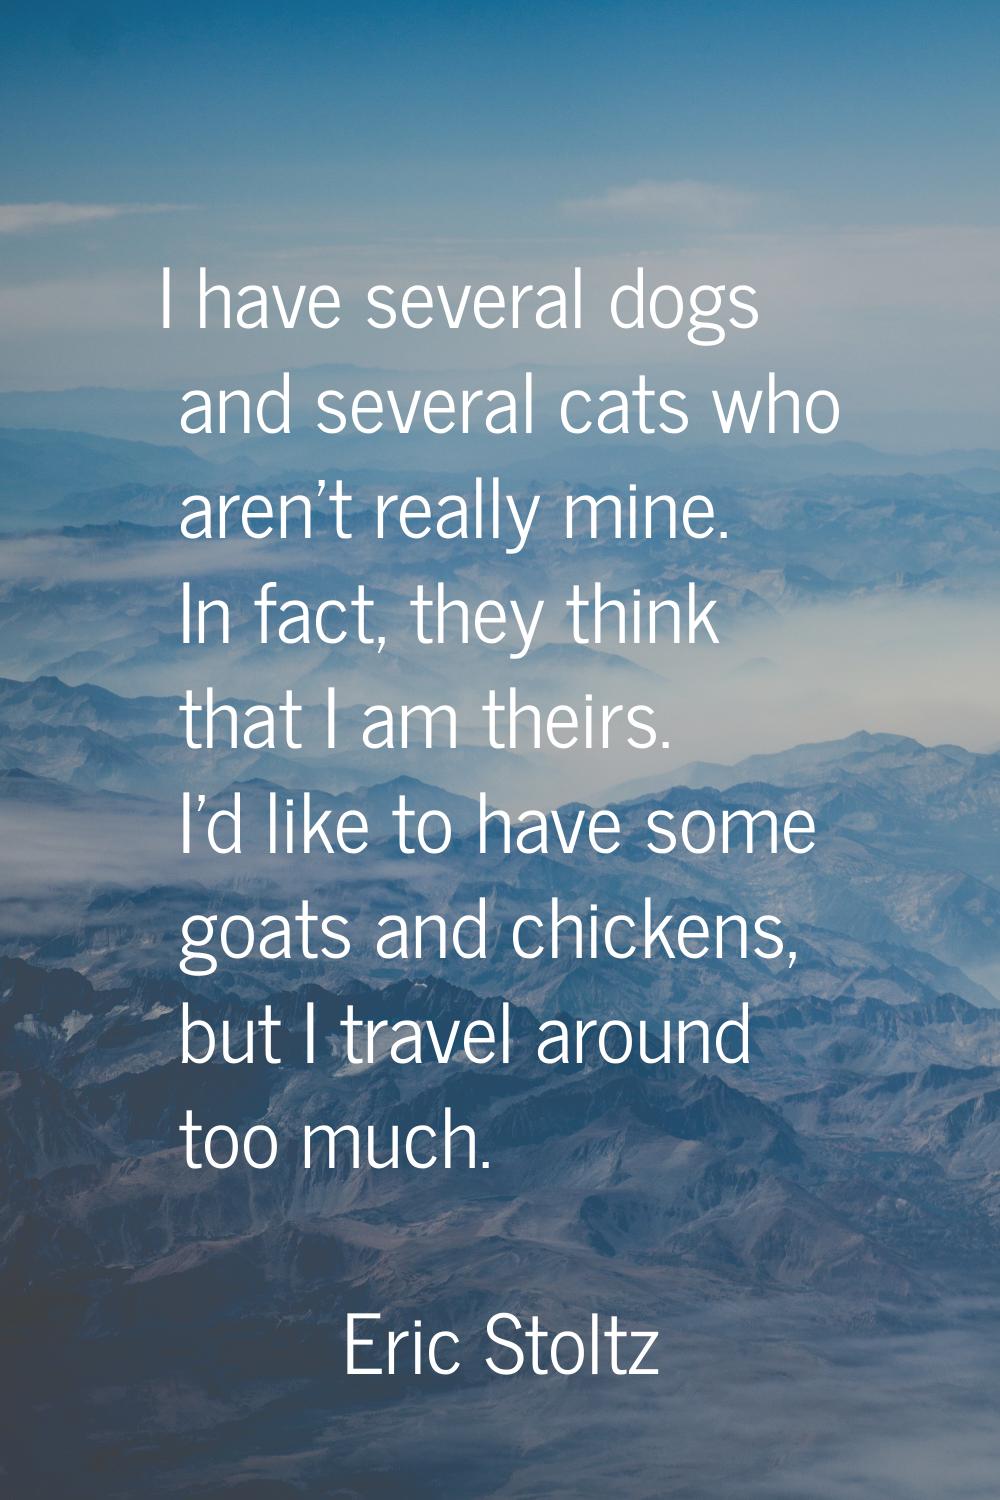 I have several dogs and several cats who aren't really mine. In fact, they think that I am theirs. 